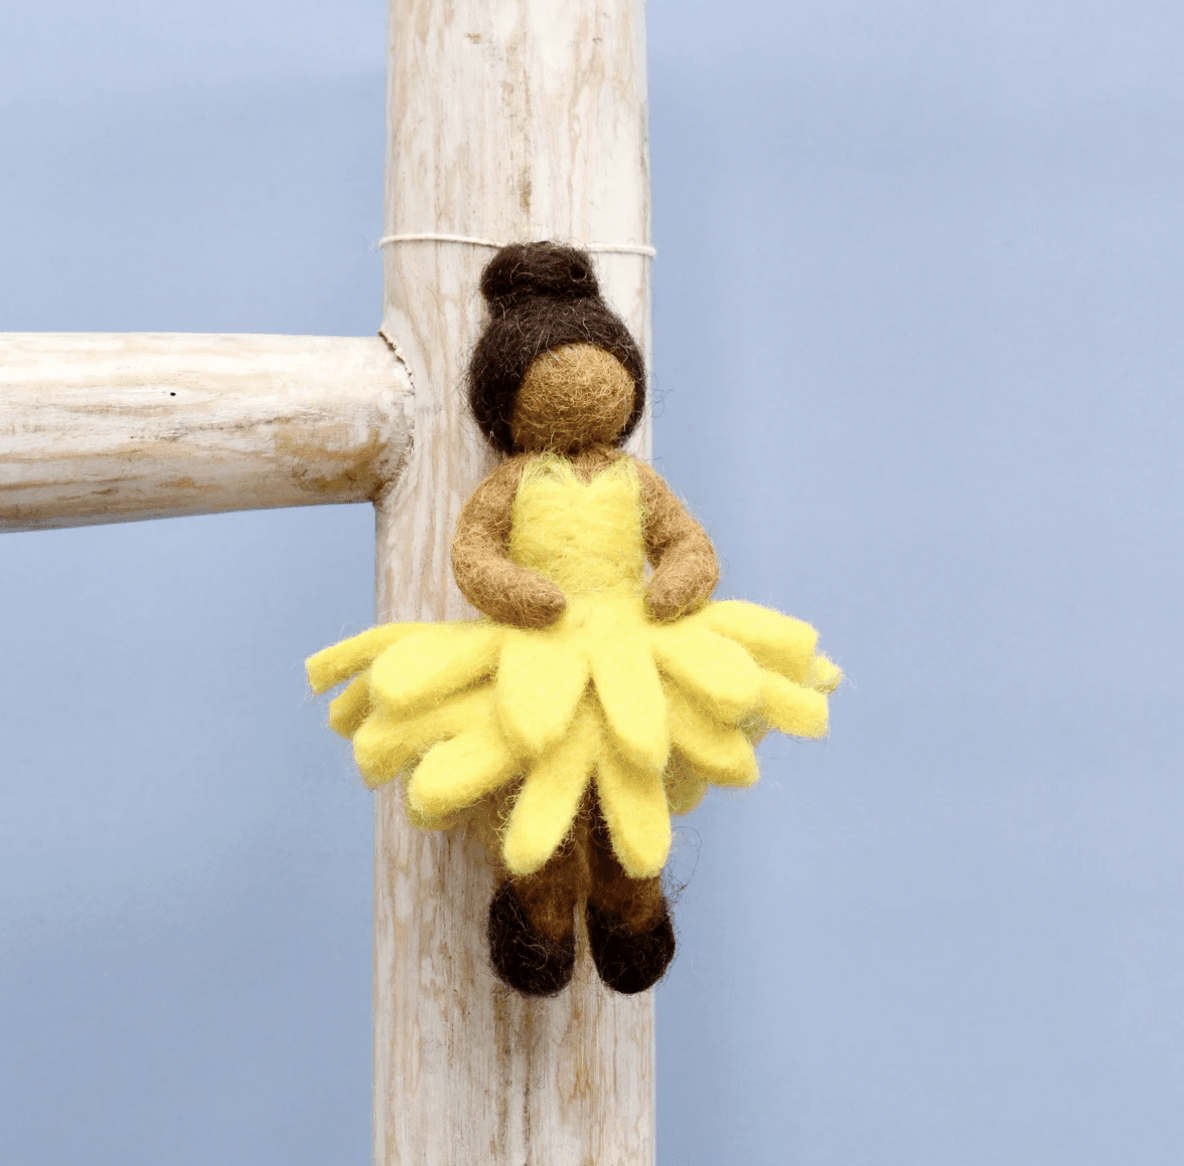 The Curated Parcel - Felt Waldorf Pocket Doll - Yellow Dress 